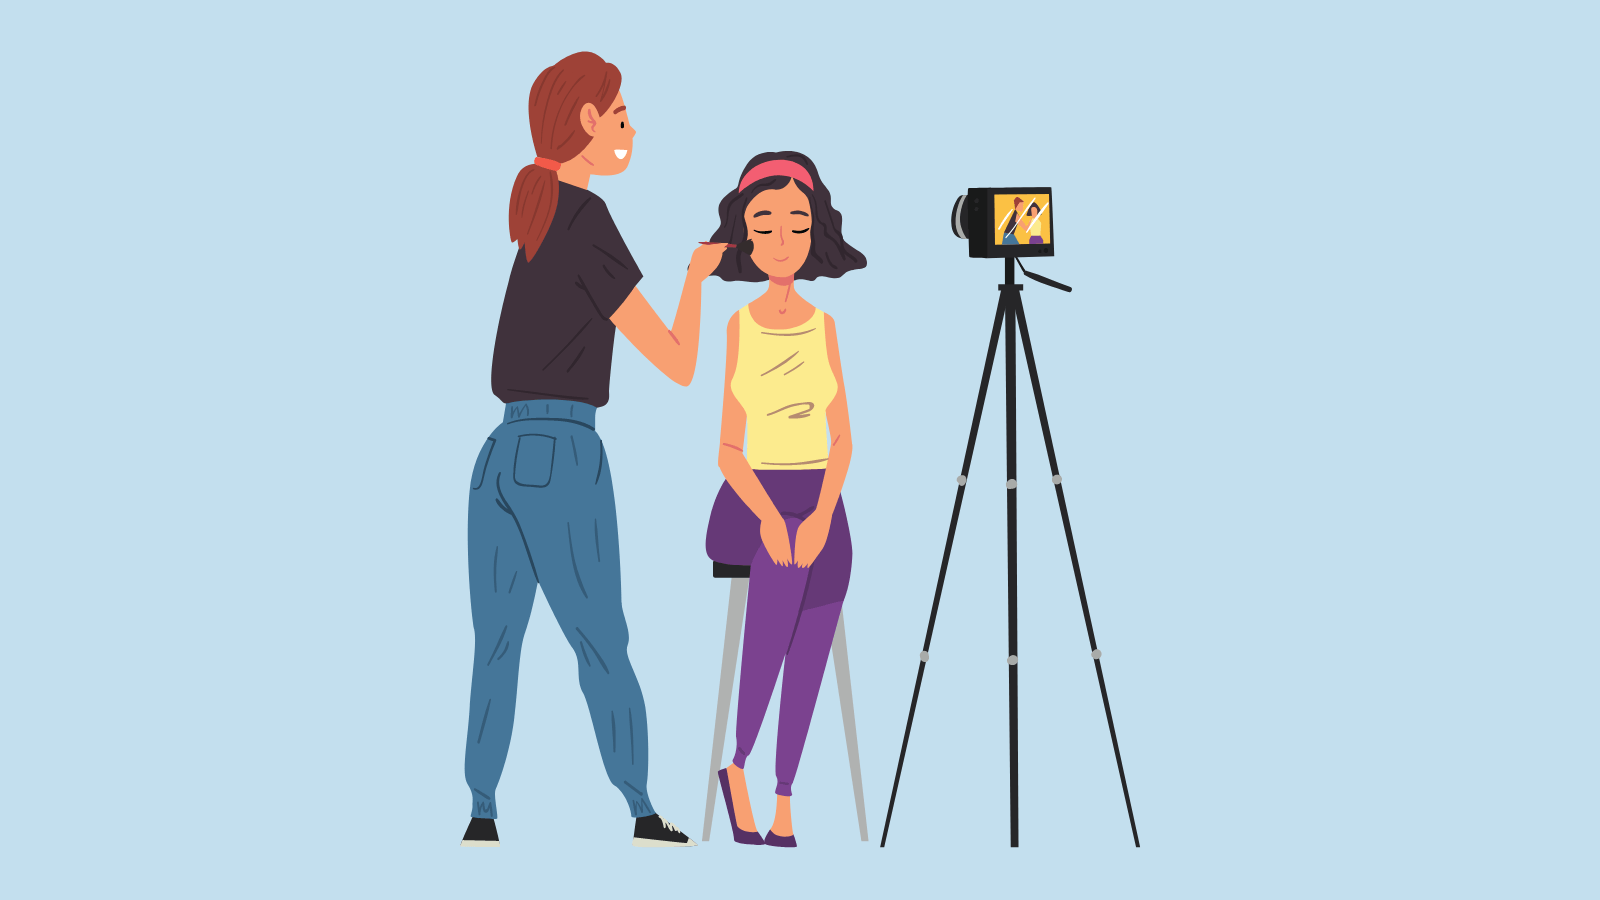 A woman putting blush on a young girl while a camera records